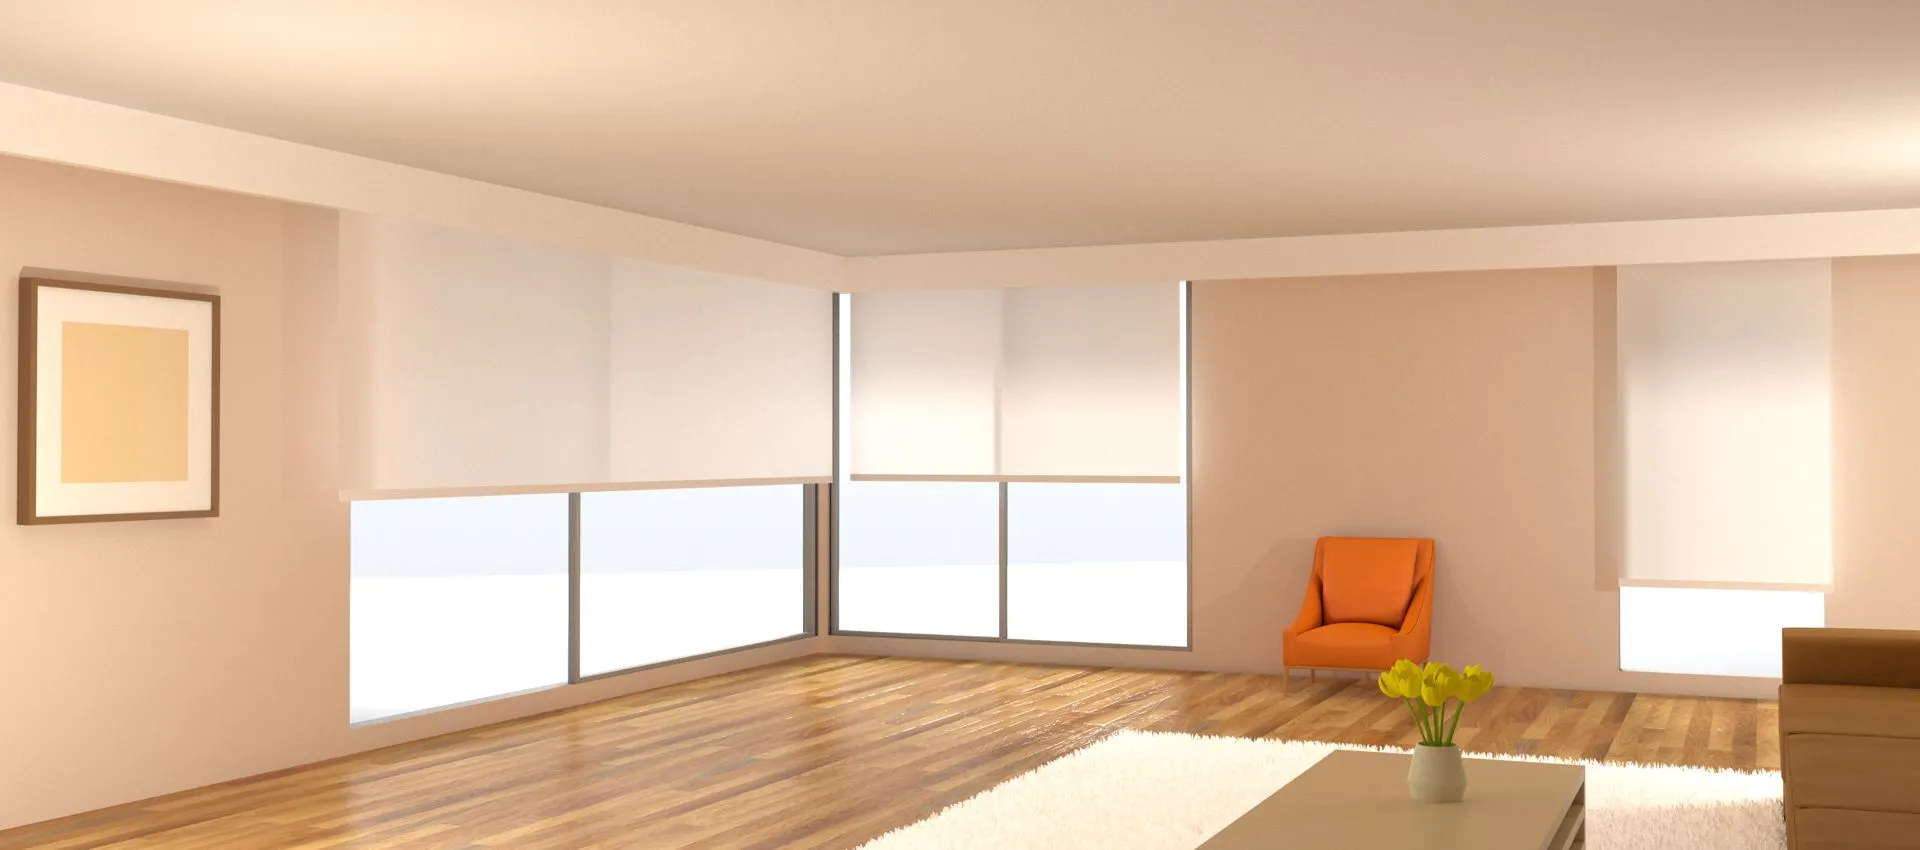 somfy house interior blinds | voice controlled blinds